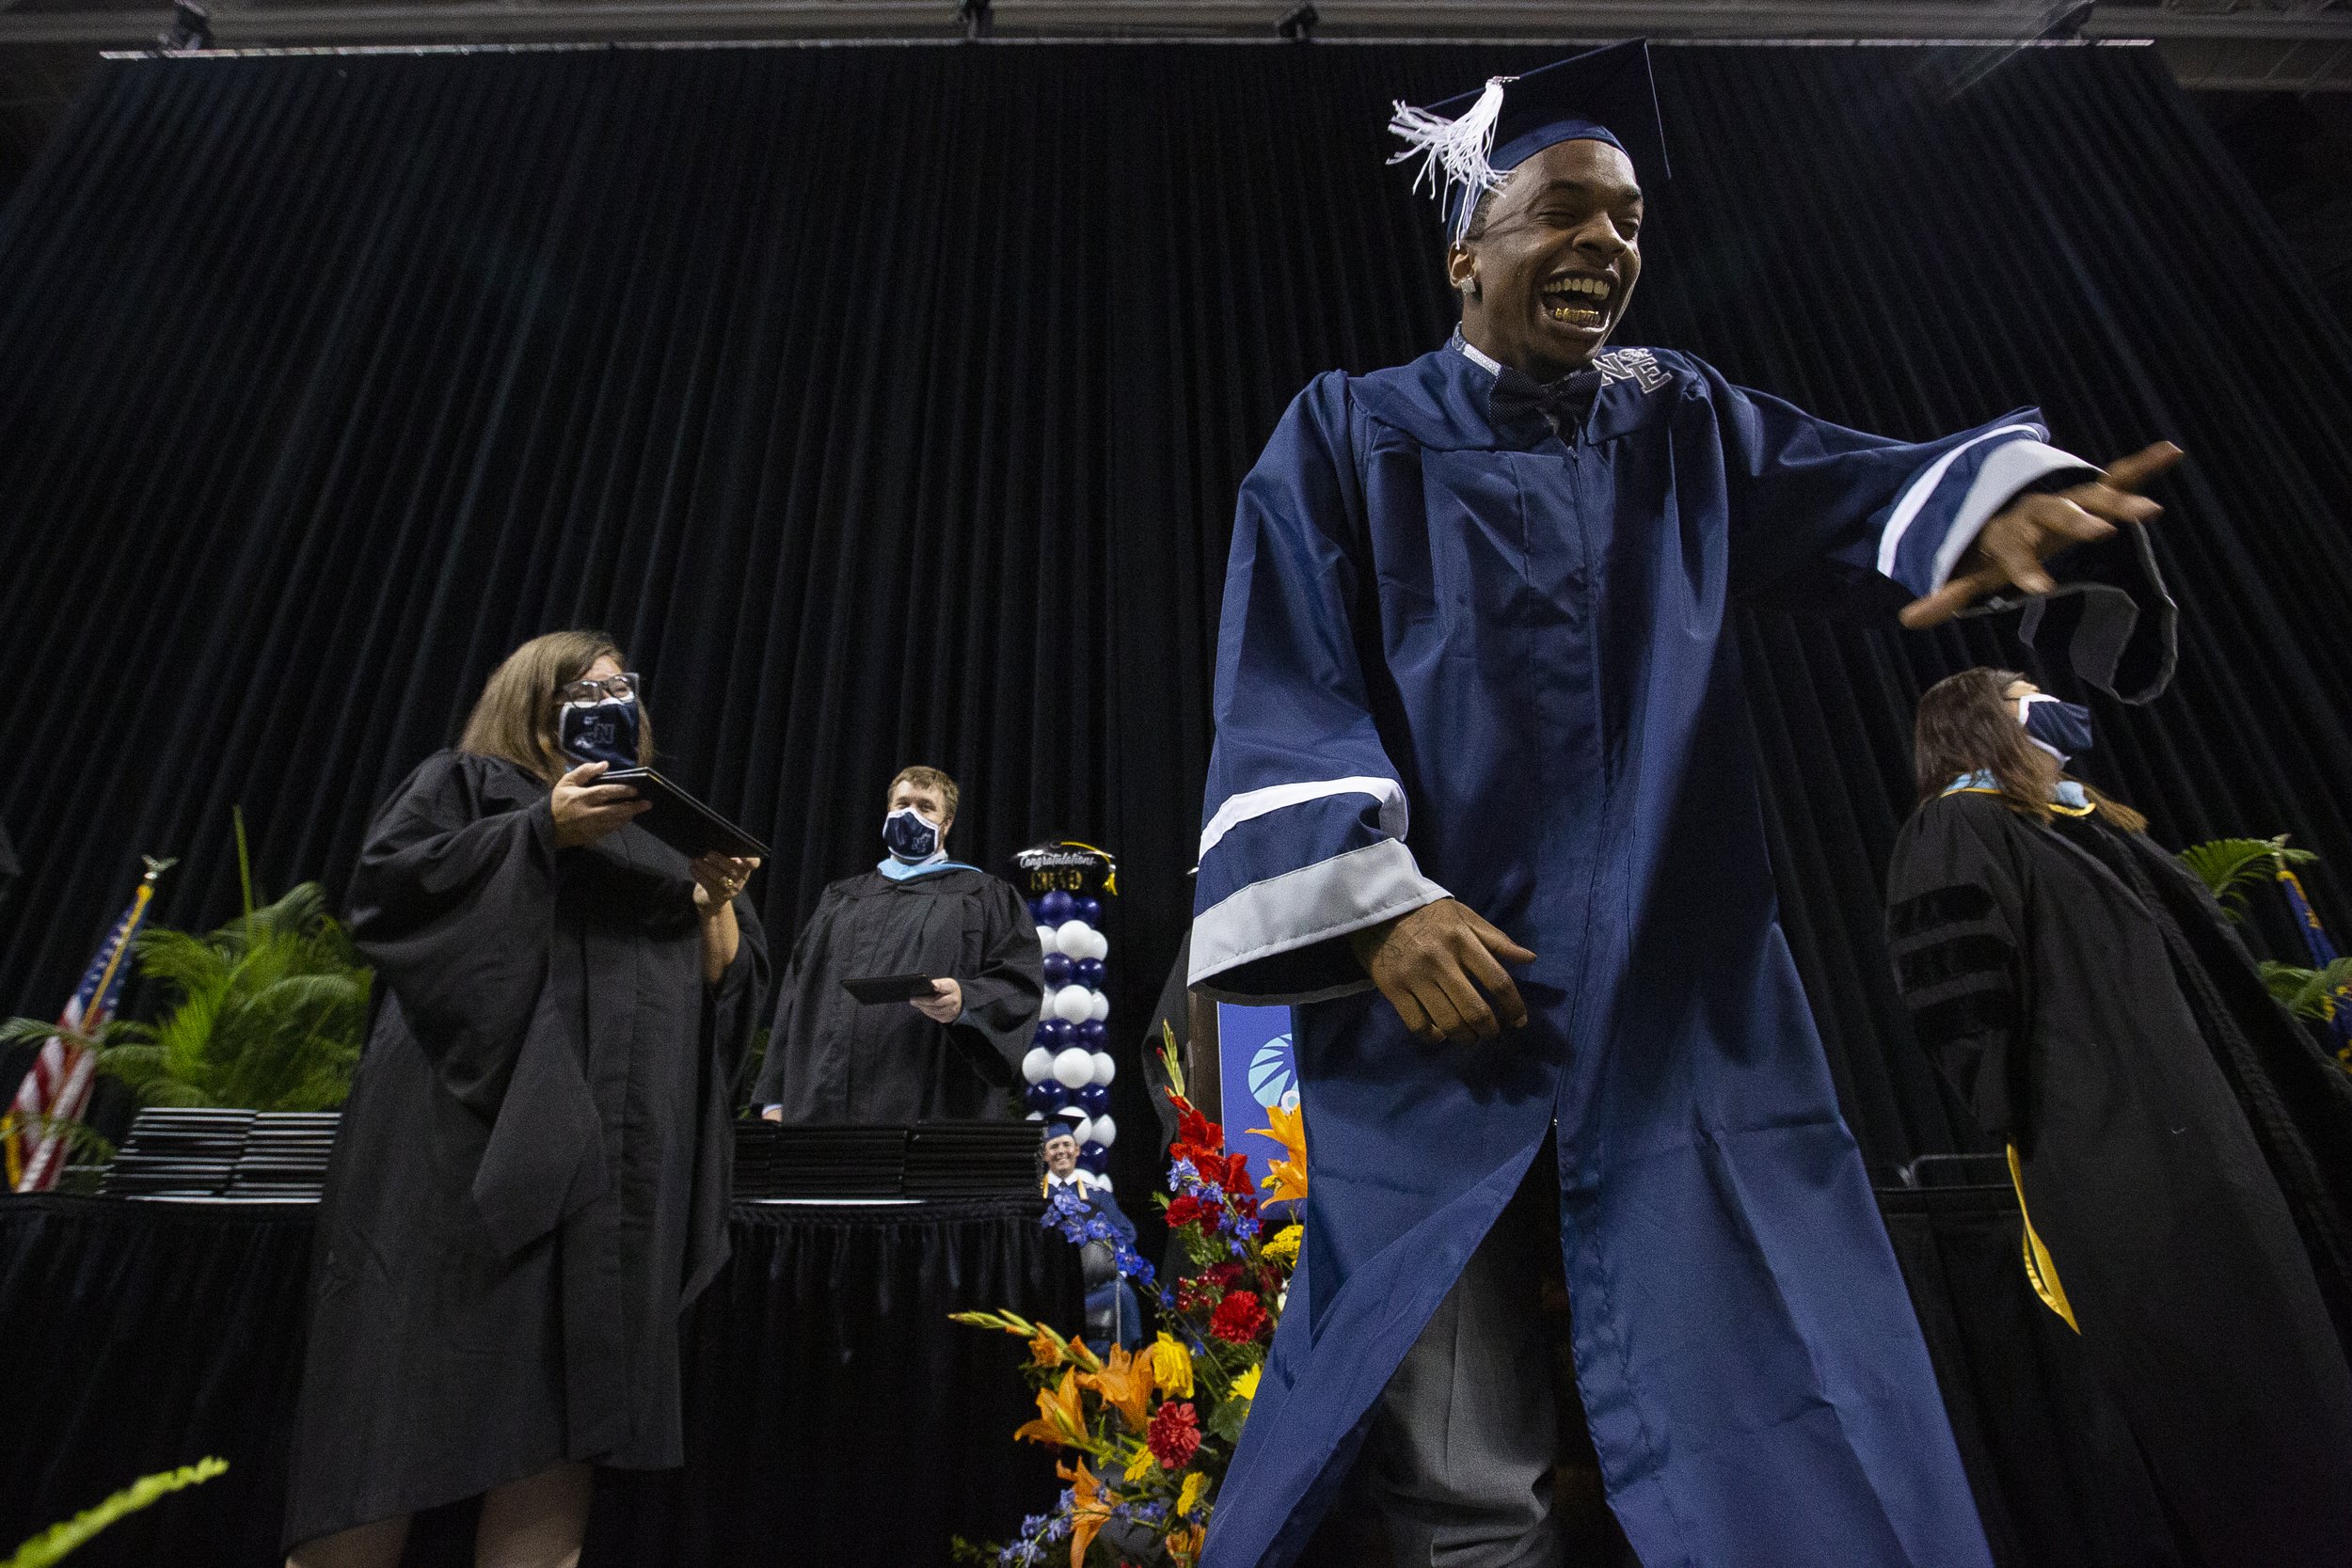  Demangio Rivers (right) dances before receiving his high school diploma during a graduation ceremony for Northeast High School at the Greensboro Coliseum in Greensboro, N.C., on Saturday, June 5, 2021.  